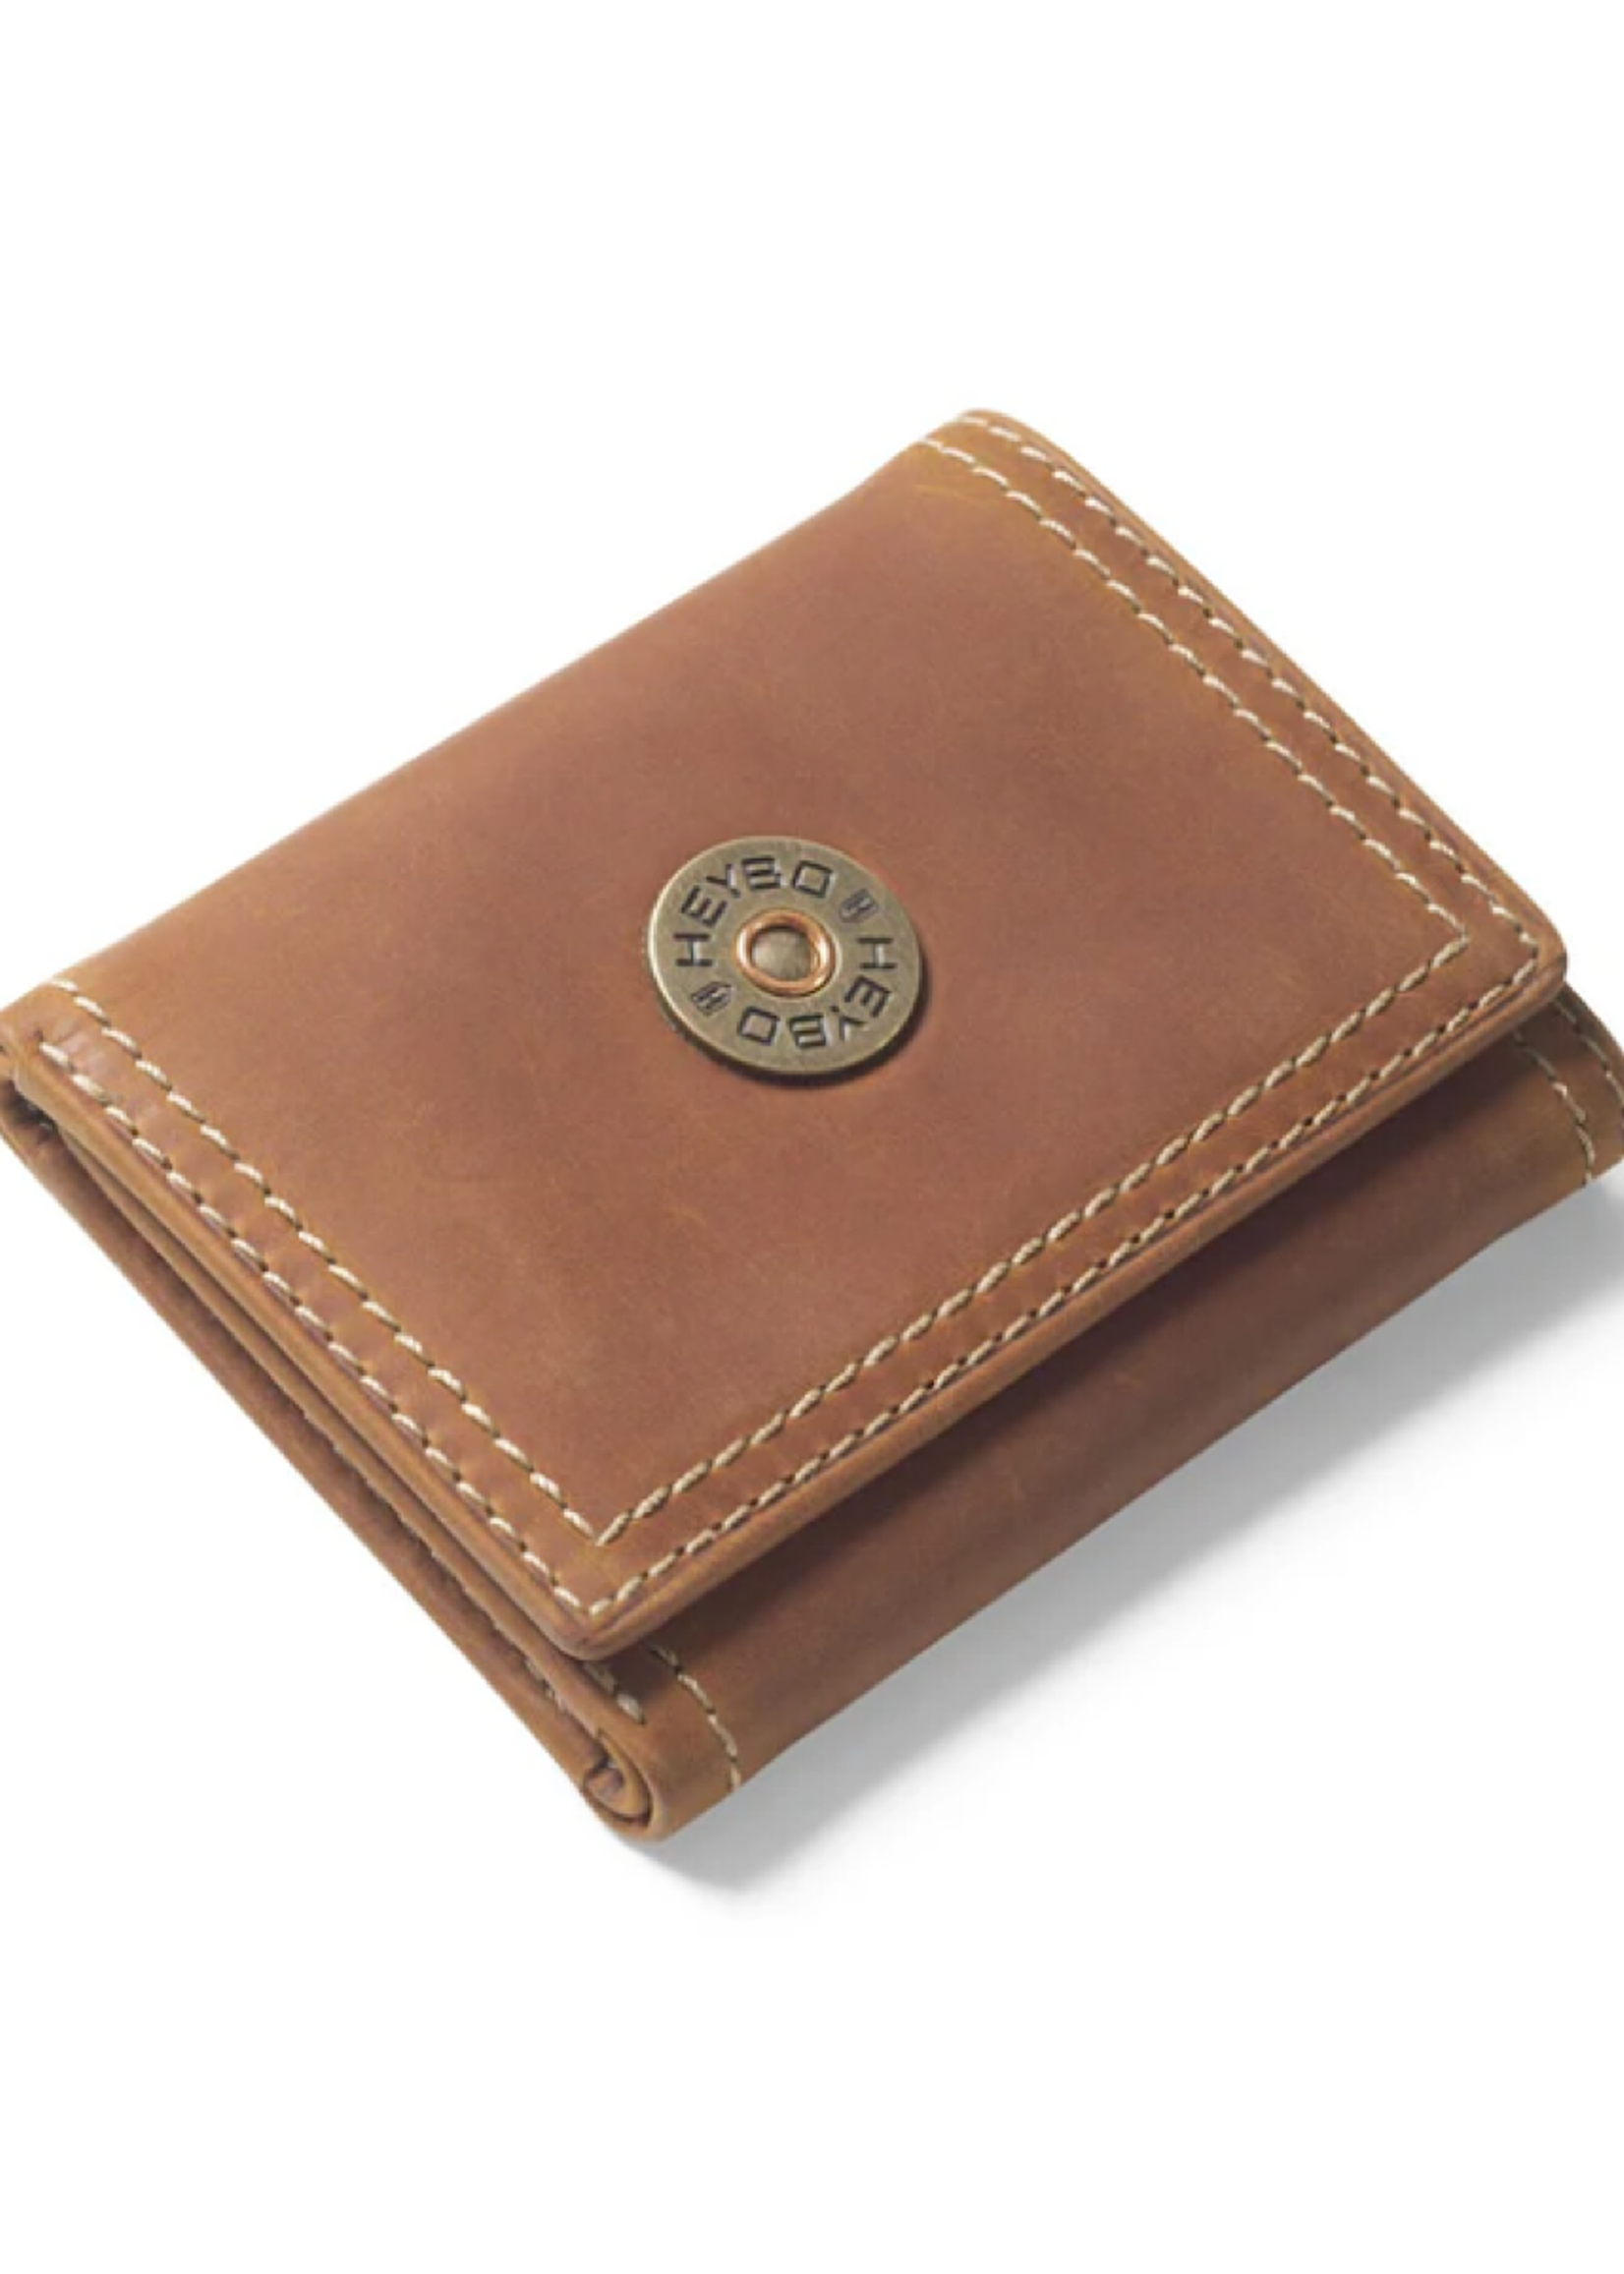 HEYBO Outdoors Heybo Leather Tri-Fold Wallet Brown